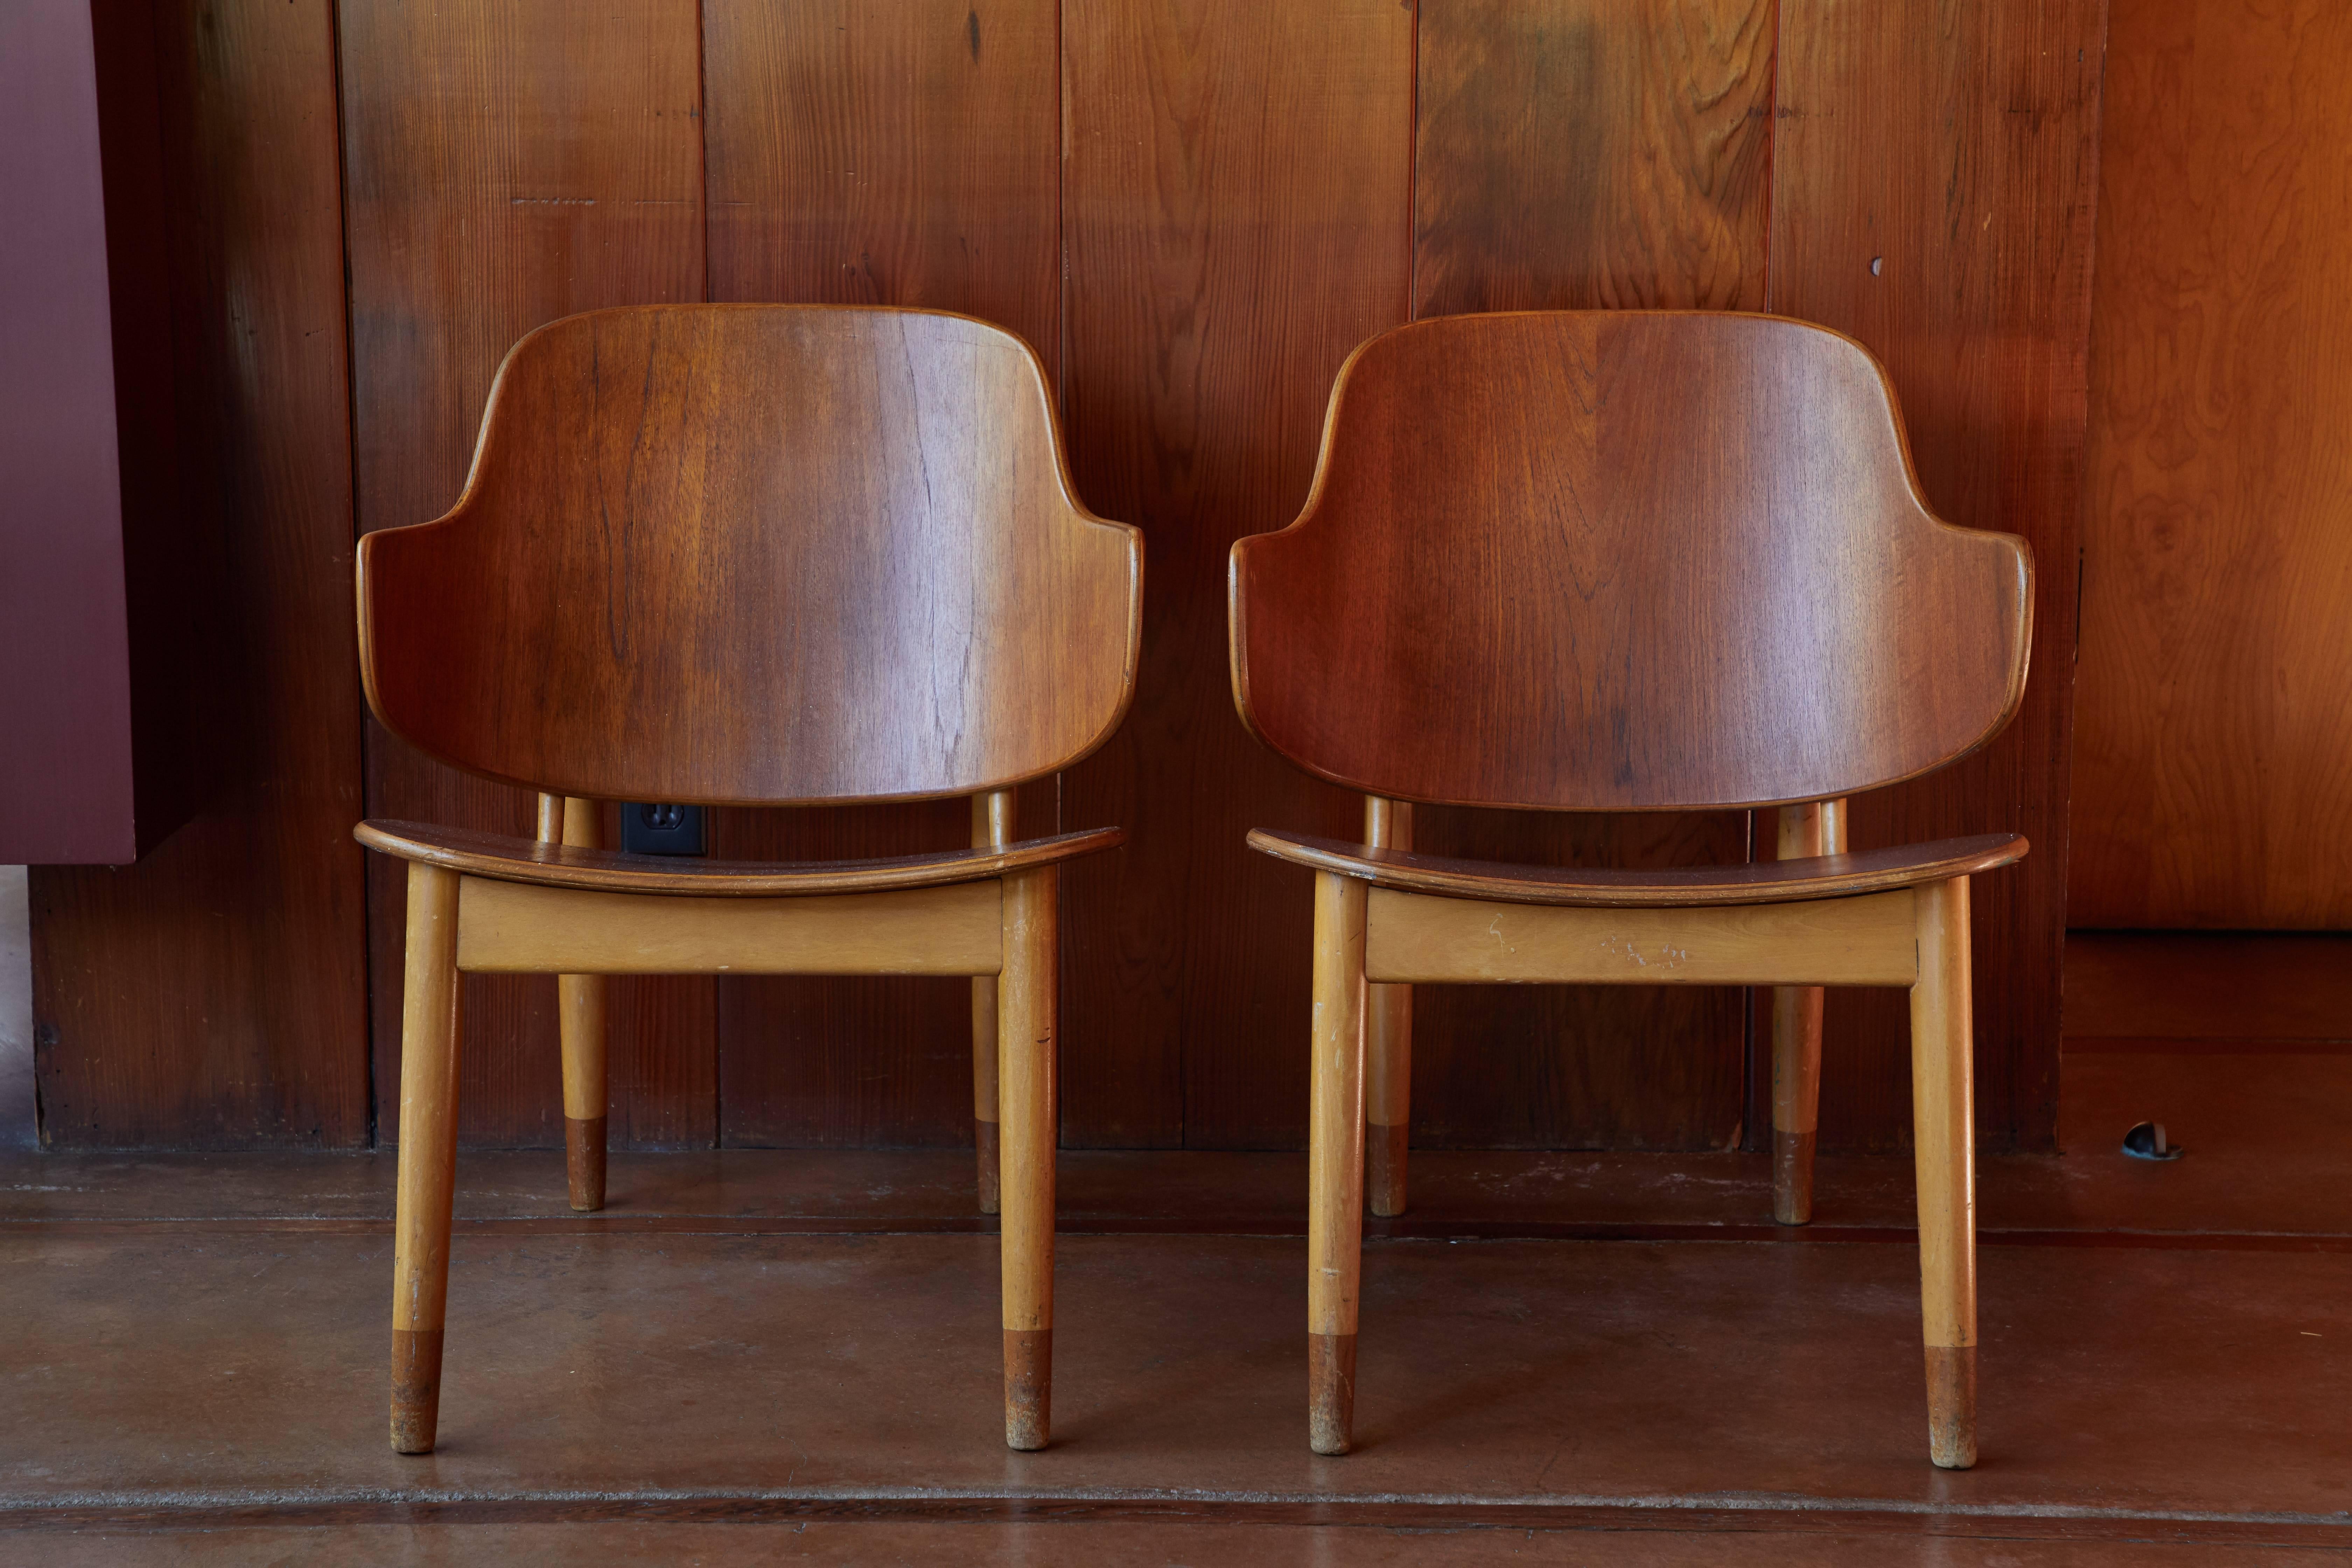 Ib Kofod-Larsen Chairs for Christiansen & Larsen. Designed in the early 1950s by Kofod Larsen and manufactured by Christensen & Larsen A/S in Denmark. A quintessentially clean and ultra refined example of the Danish Modernist aesthetic at its very